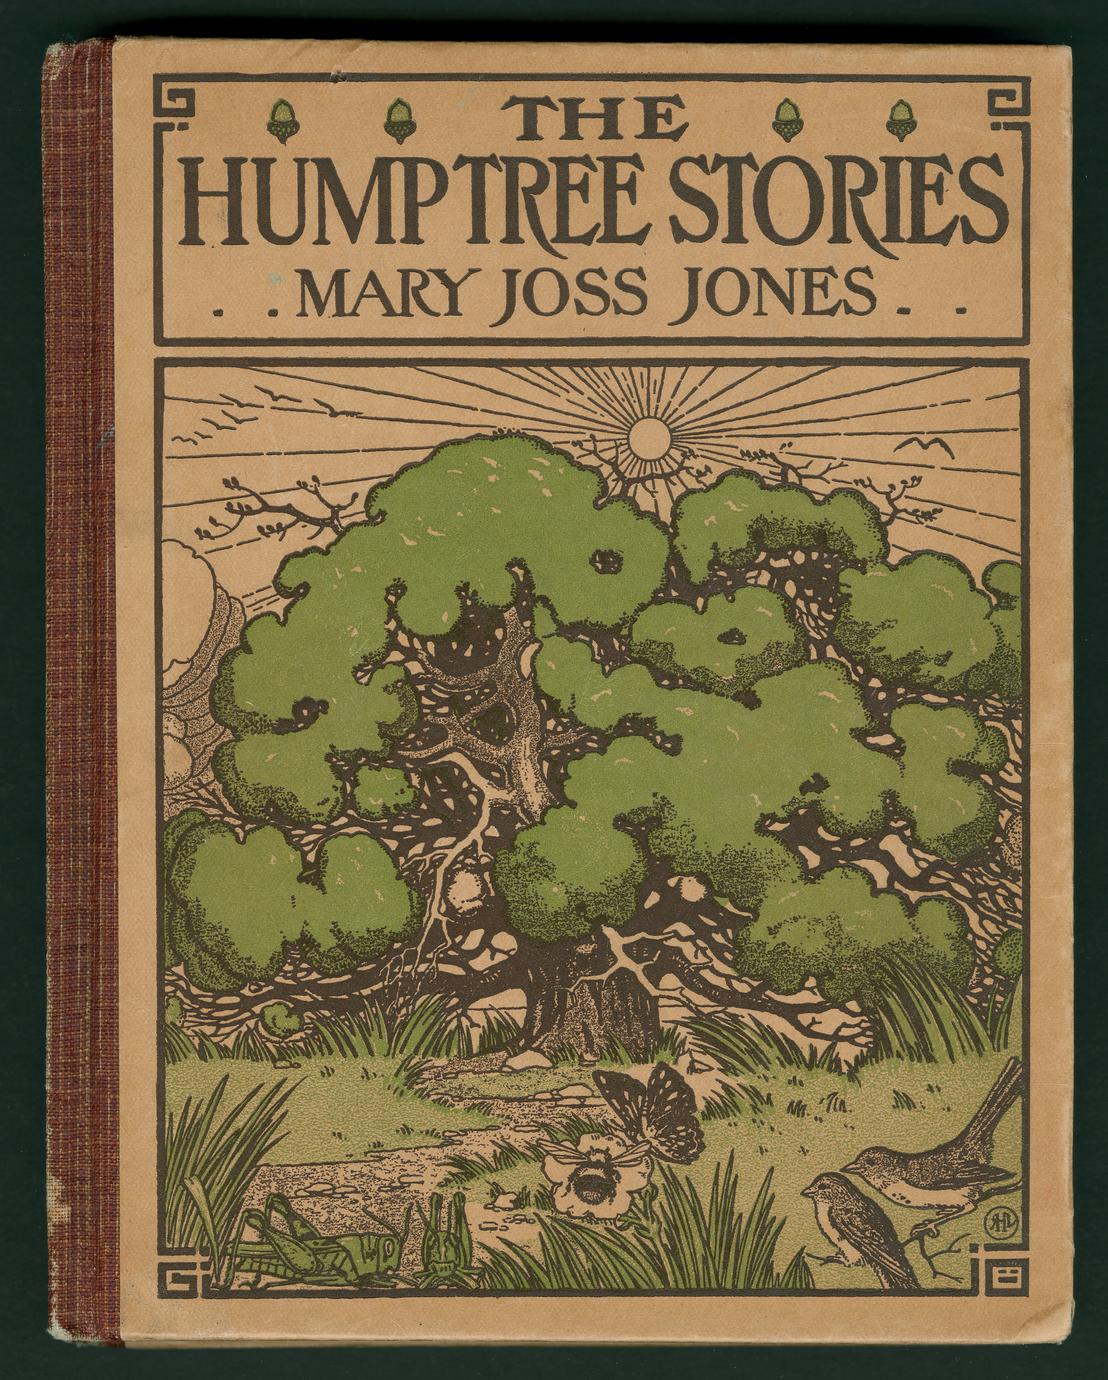 The Hump tree stories (1 of 3)